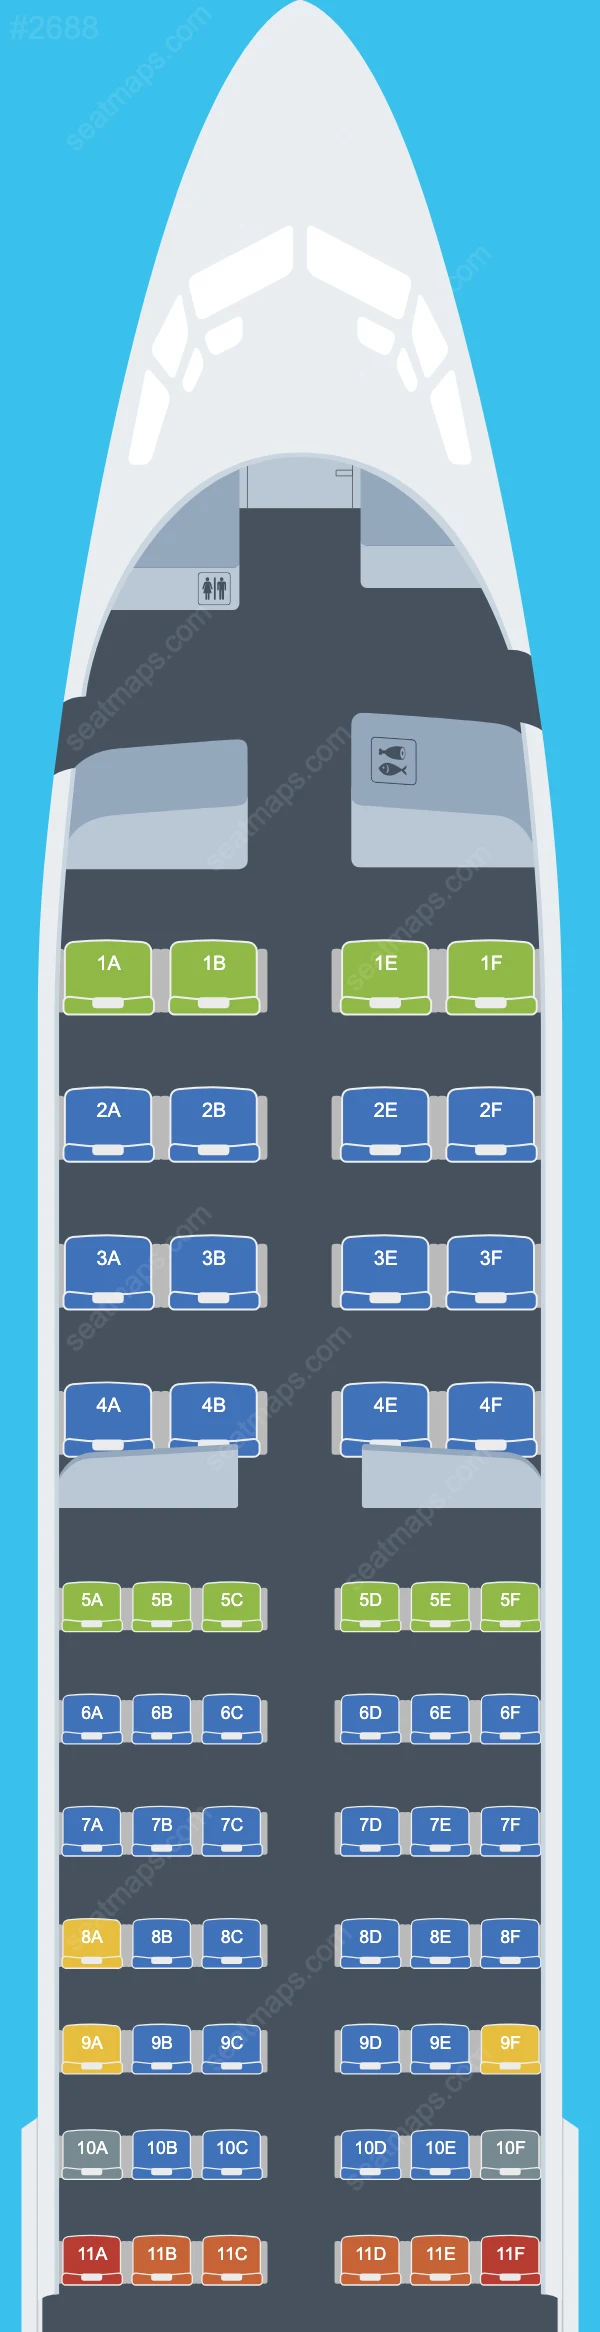 Copa Airlines Boeing 737 Seat Maps 737-800 V.2